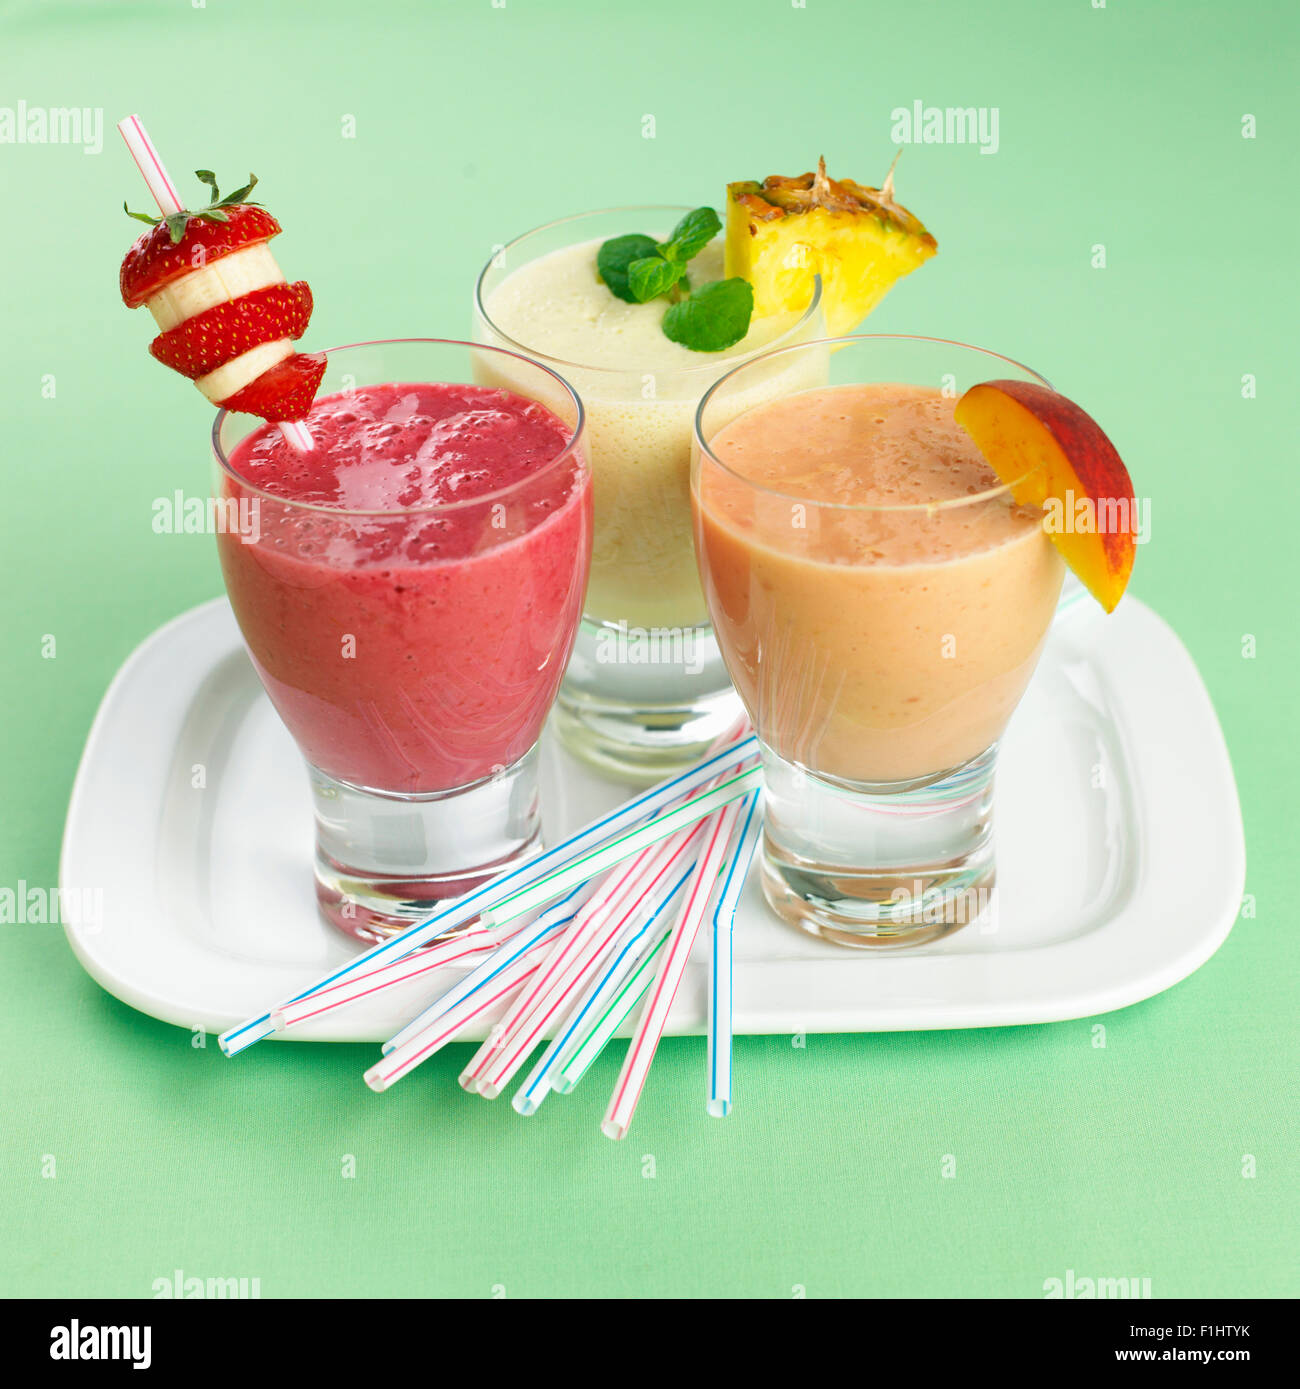 Tray with three glasses of smoothies Stock Photo